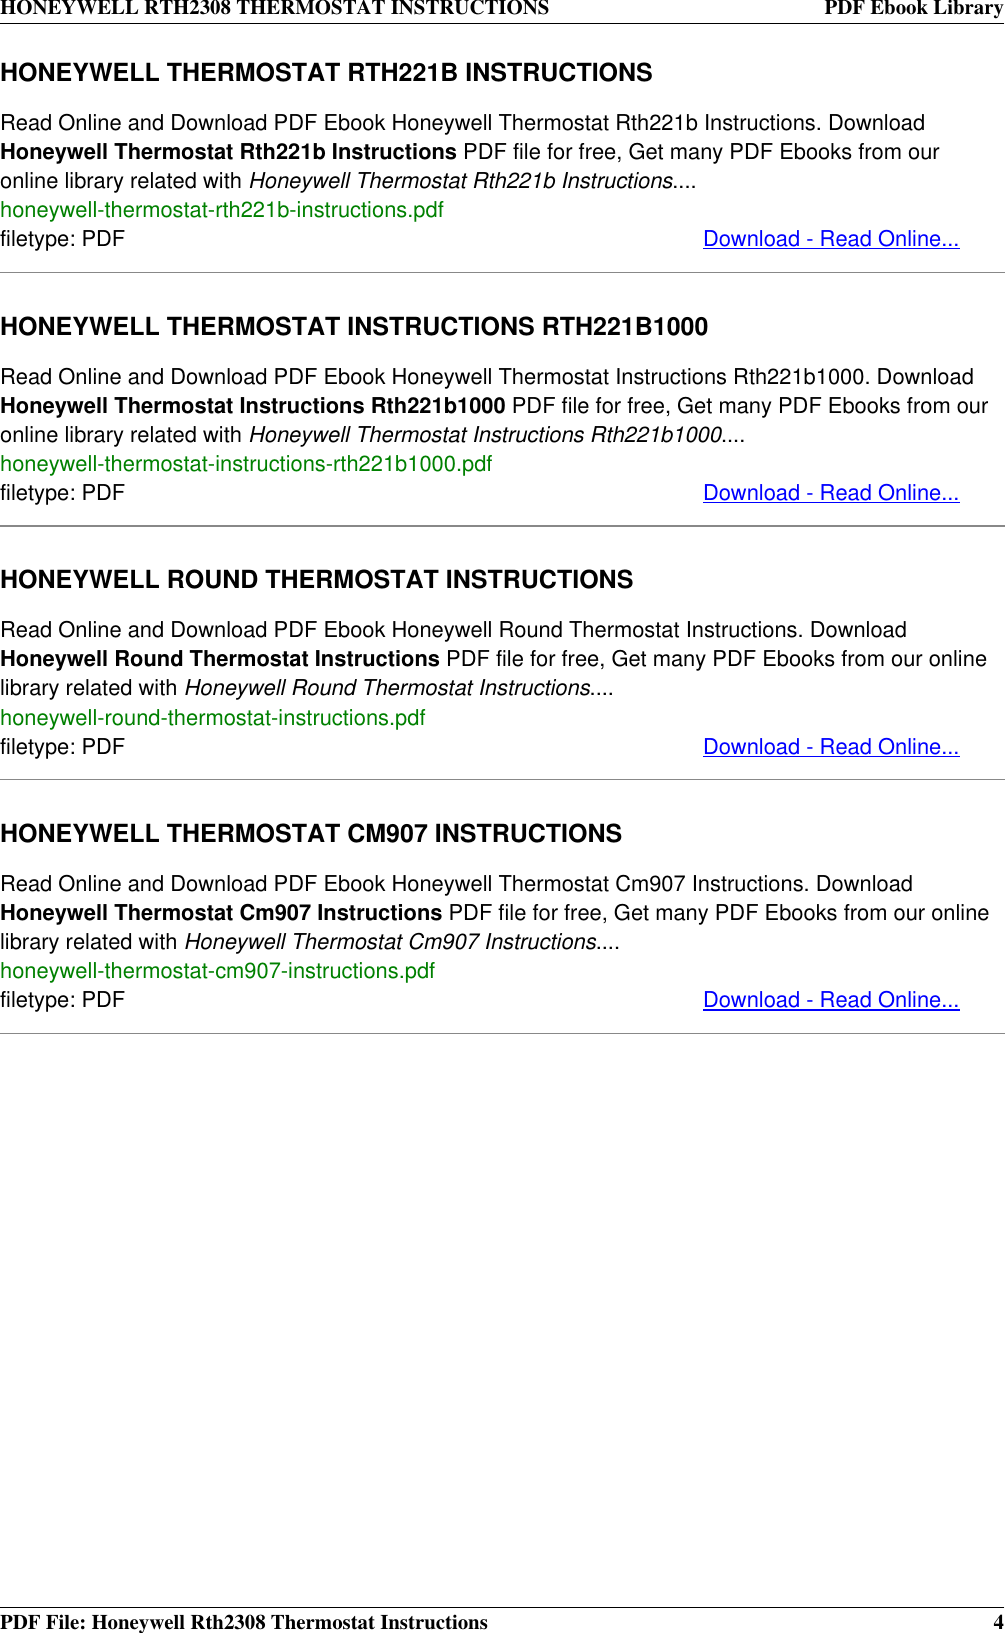 Page 4 of 4 - Honeywell Honeywell-Honeywell-Thermostat-Rth2308-Users-Manual- RTH2308 THERMOSTAT INSTRUCTIONS  Honeywell-honeywell-thermostat-rth2308-users-manual